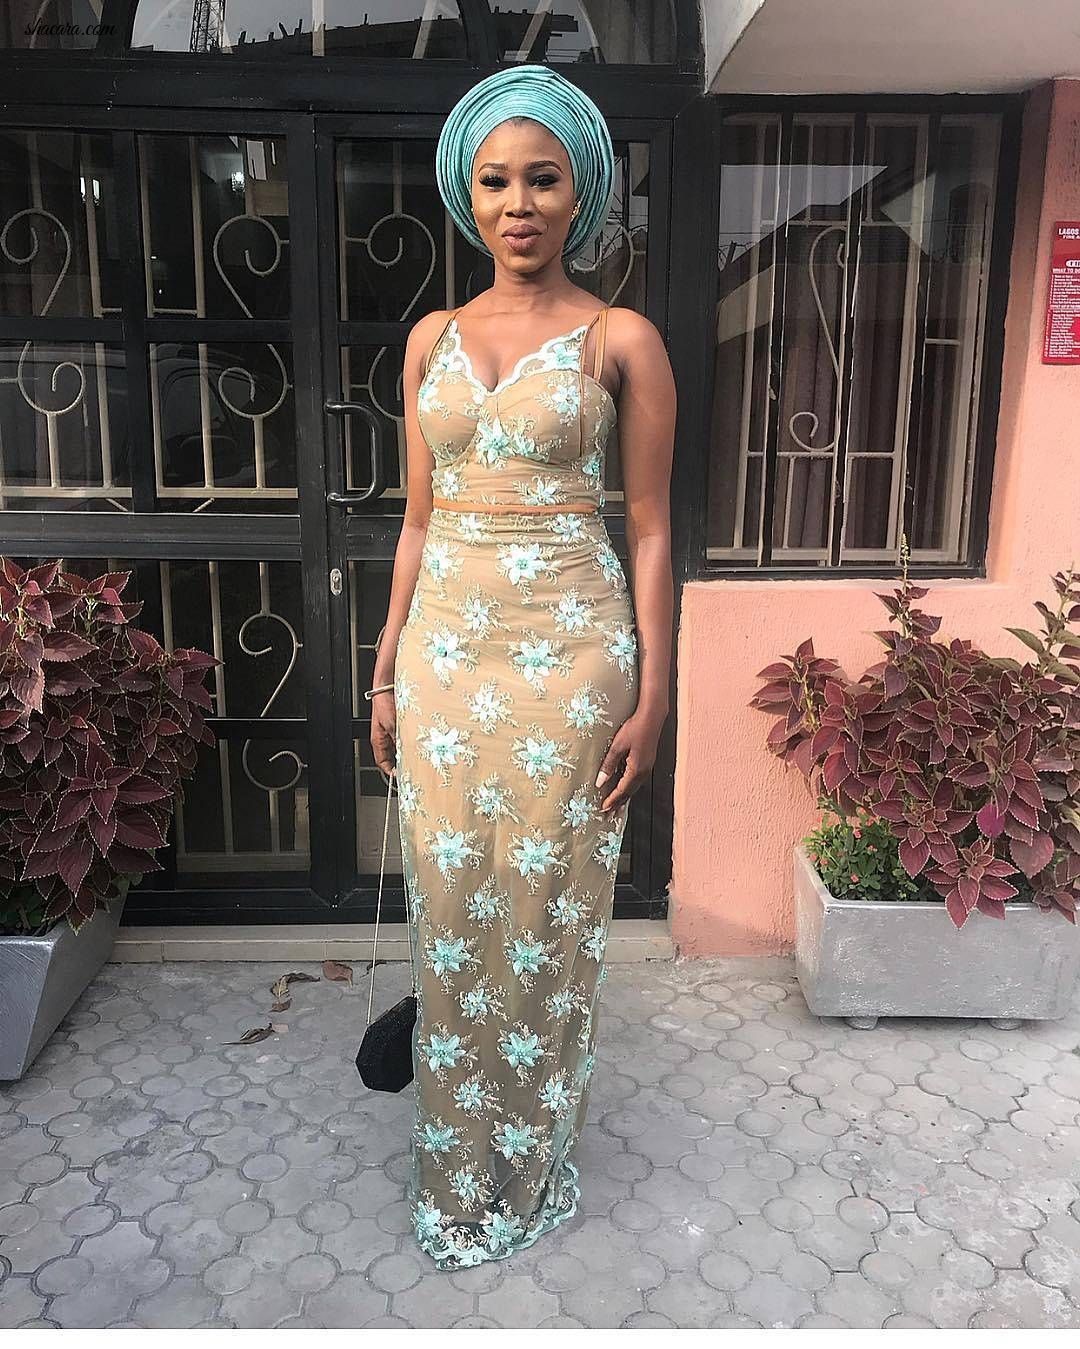 CHECK OUT THESE ASO EBI STYLES FOR THE FLY AND FABULOUS DAYS